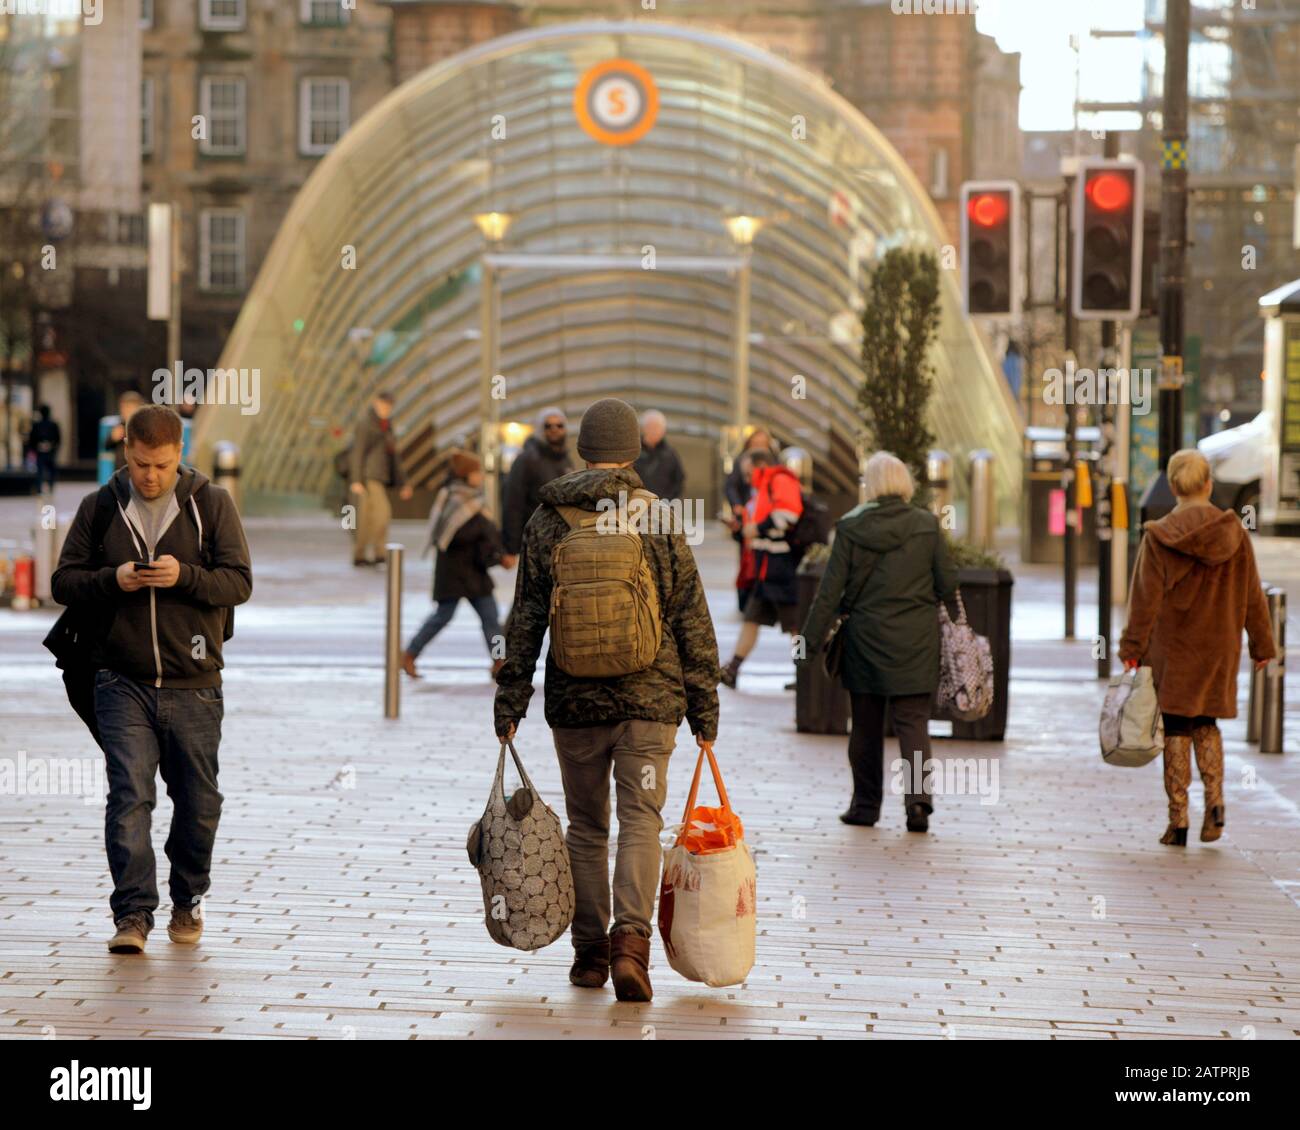 Glasgow, Scotland, UK, 4th February, 2020: UK Weather: Sunny in the city centre as locals and tourists enjoy the first good day of the year at st enoch subway om buchanan street the style mile. Copywrite Gerard Ferry/ Alamy Live News Stock Photo